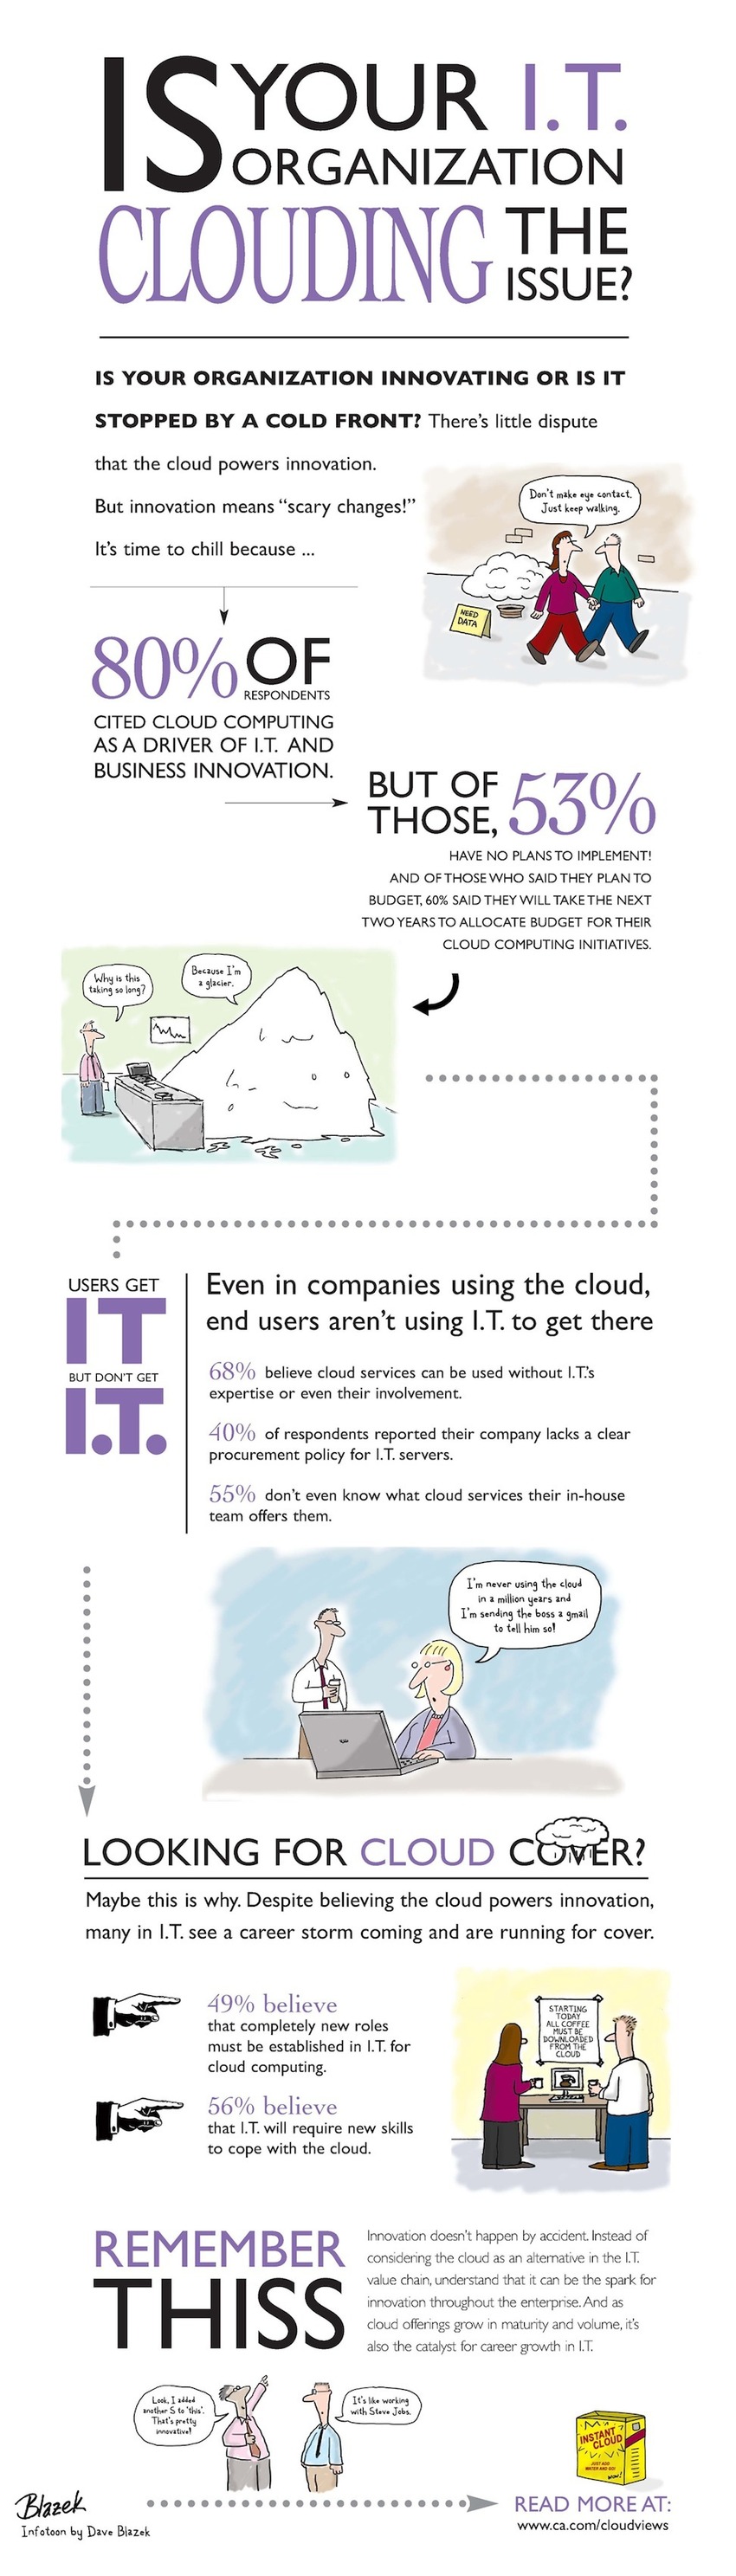 Who's Afraid of the Big Bad Cloud? [INFOGRAPHIC] | The MarTech Digest | Scoop.it